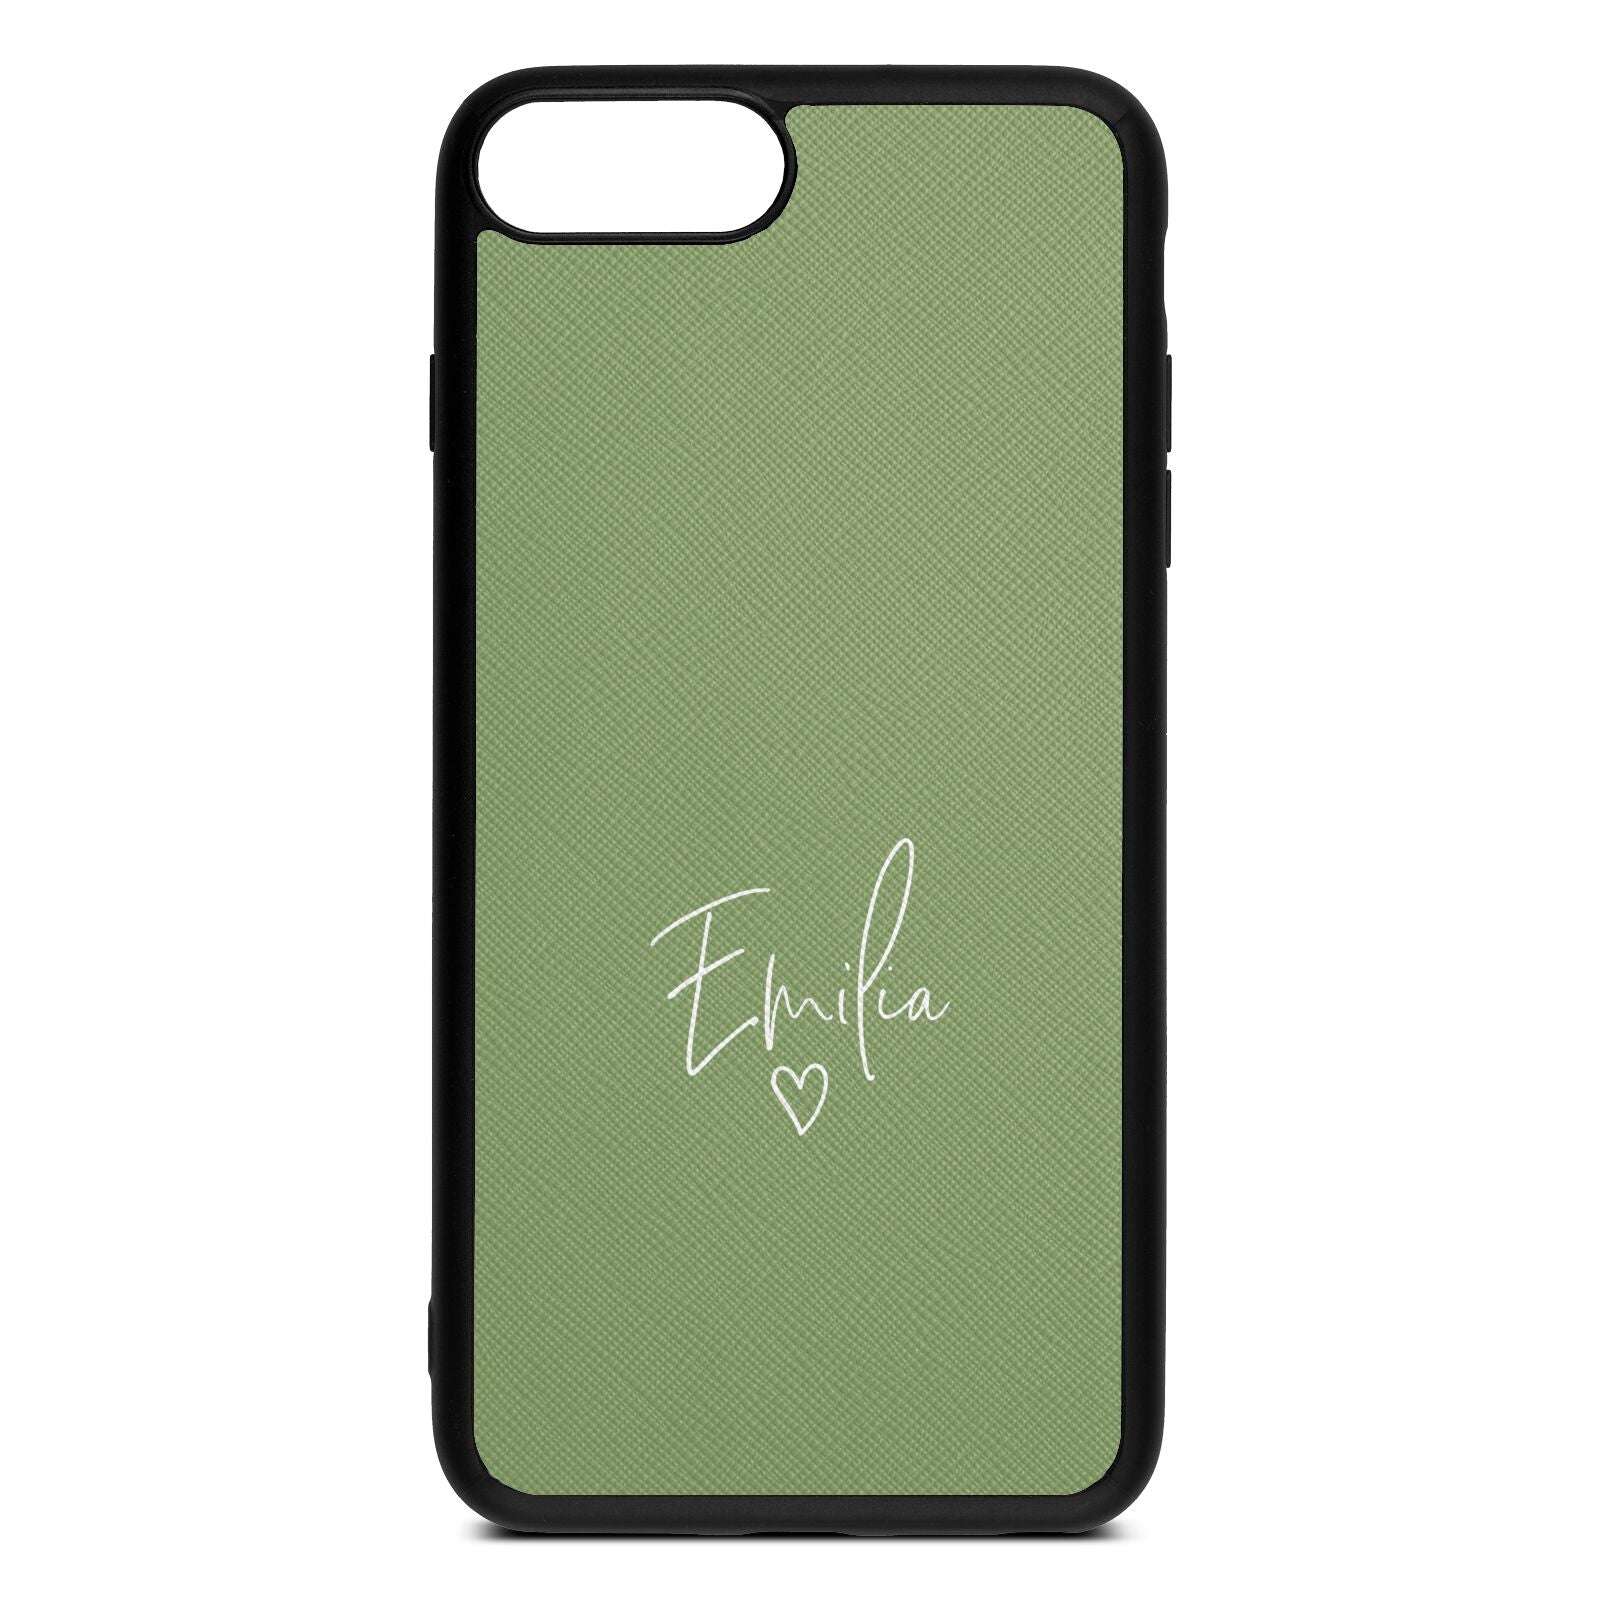 White Handwritten Name Transparent Lime Saffiano Leather iPhone 8 Plus Case